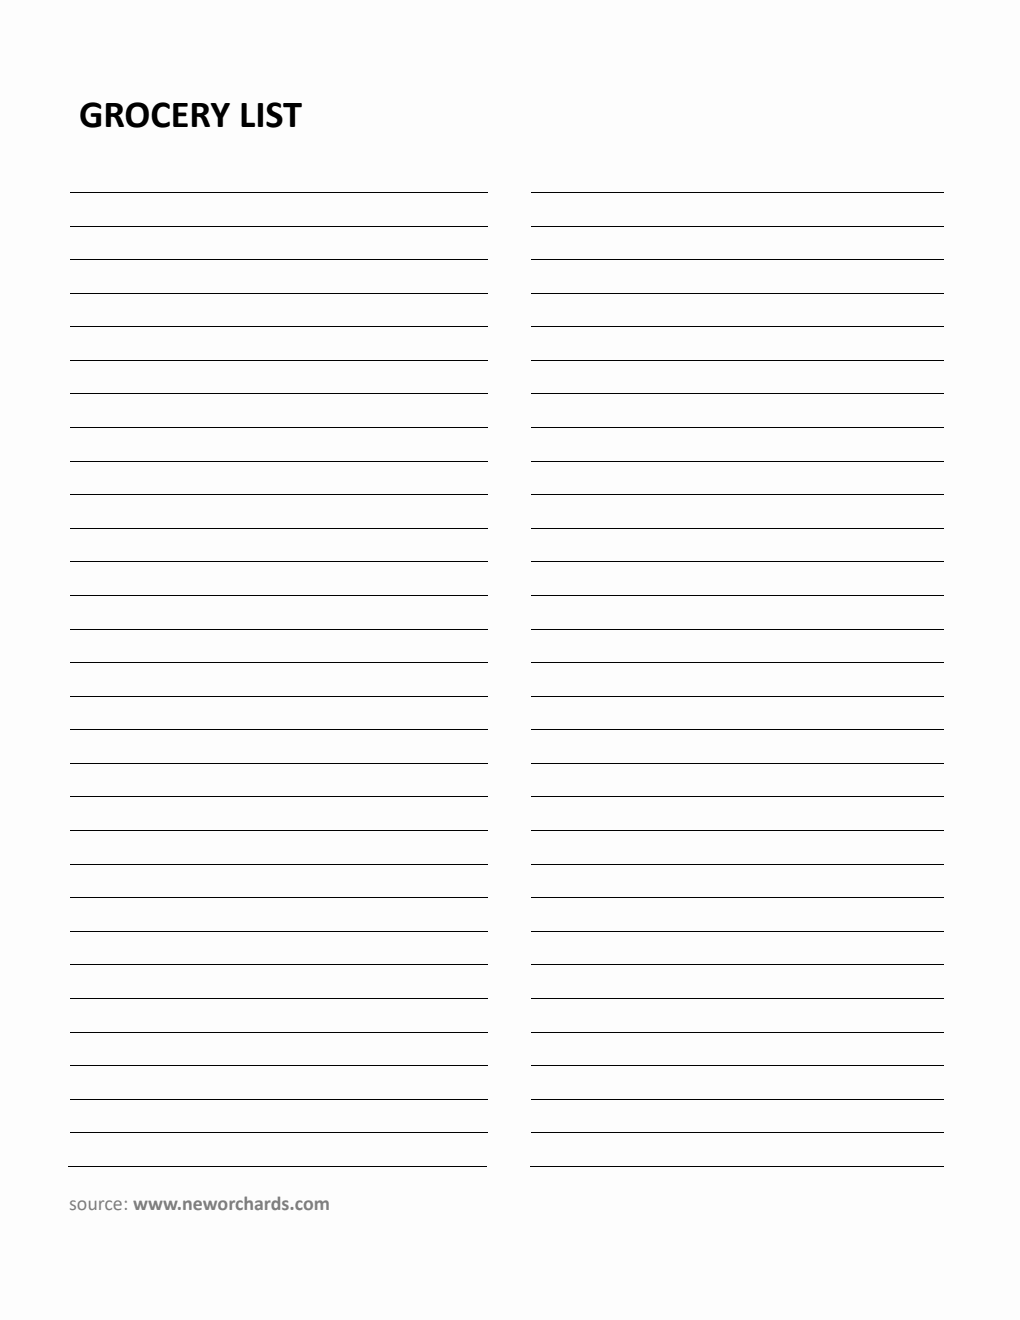 Blank Grocery List Template in Word